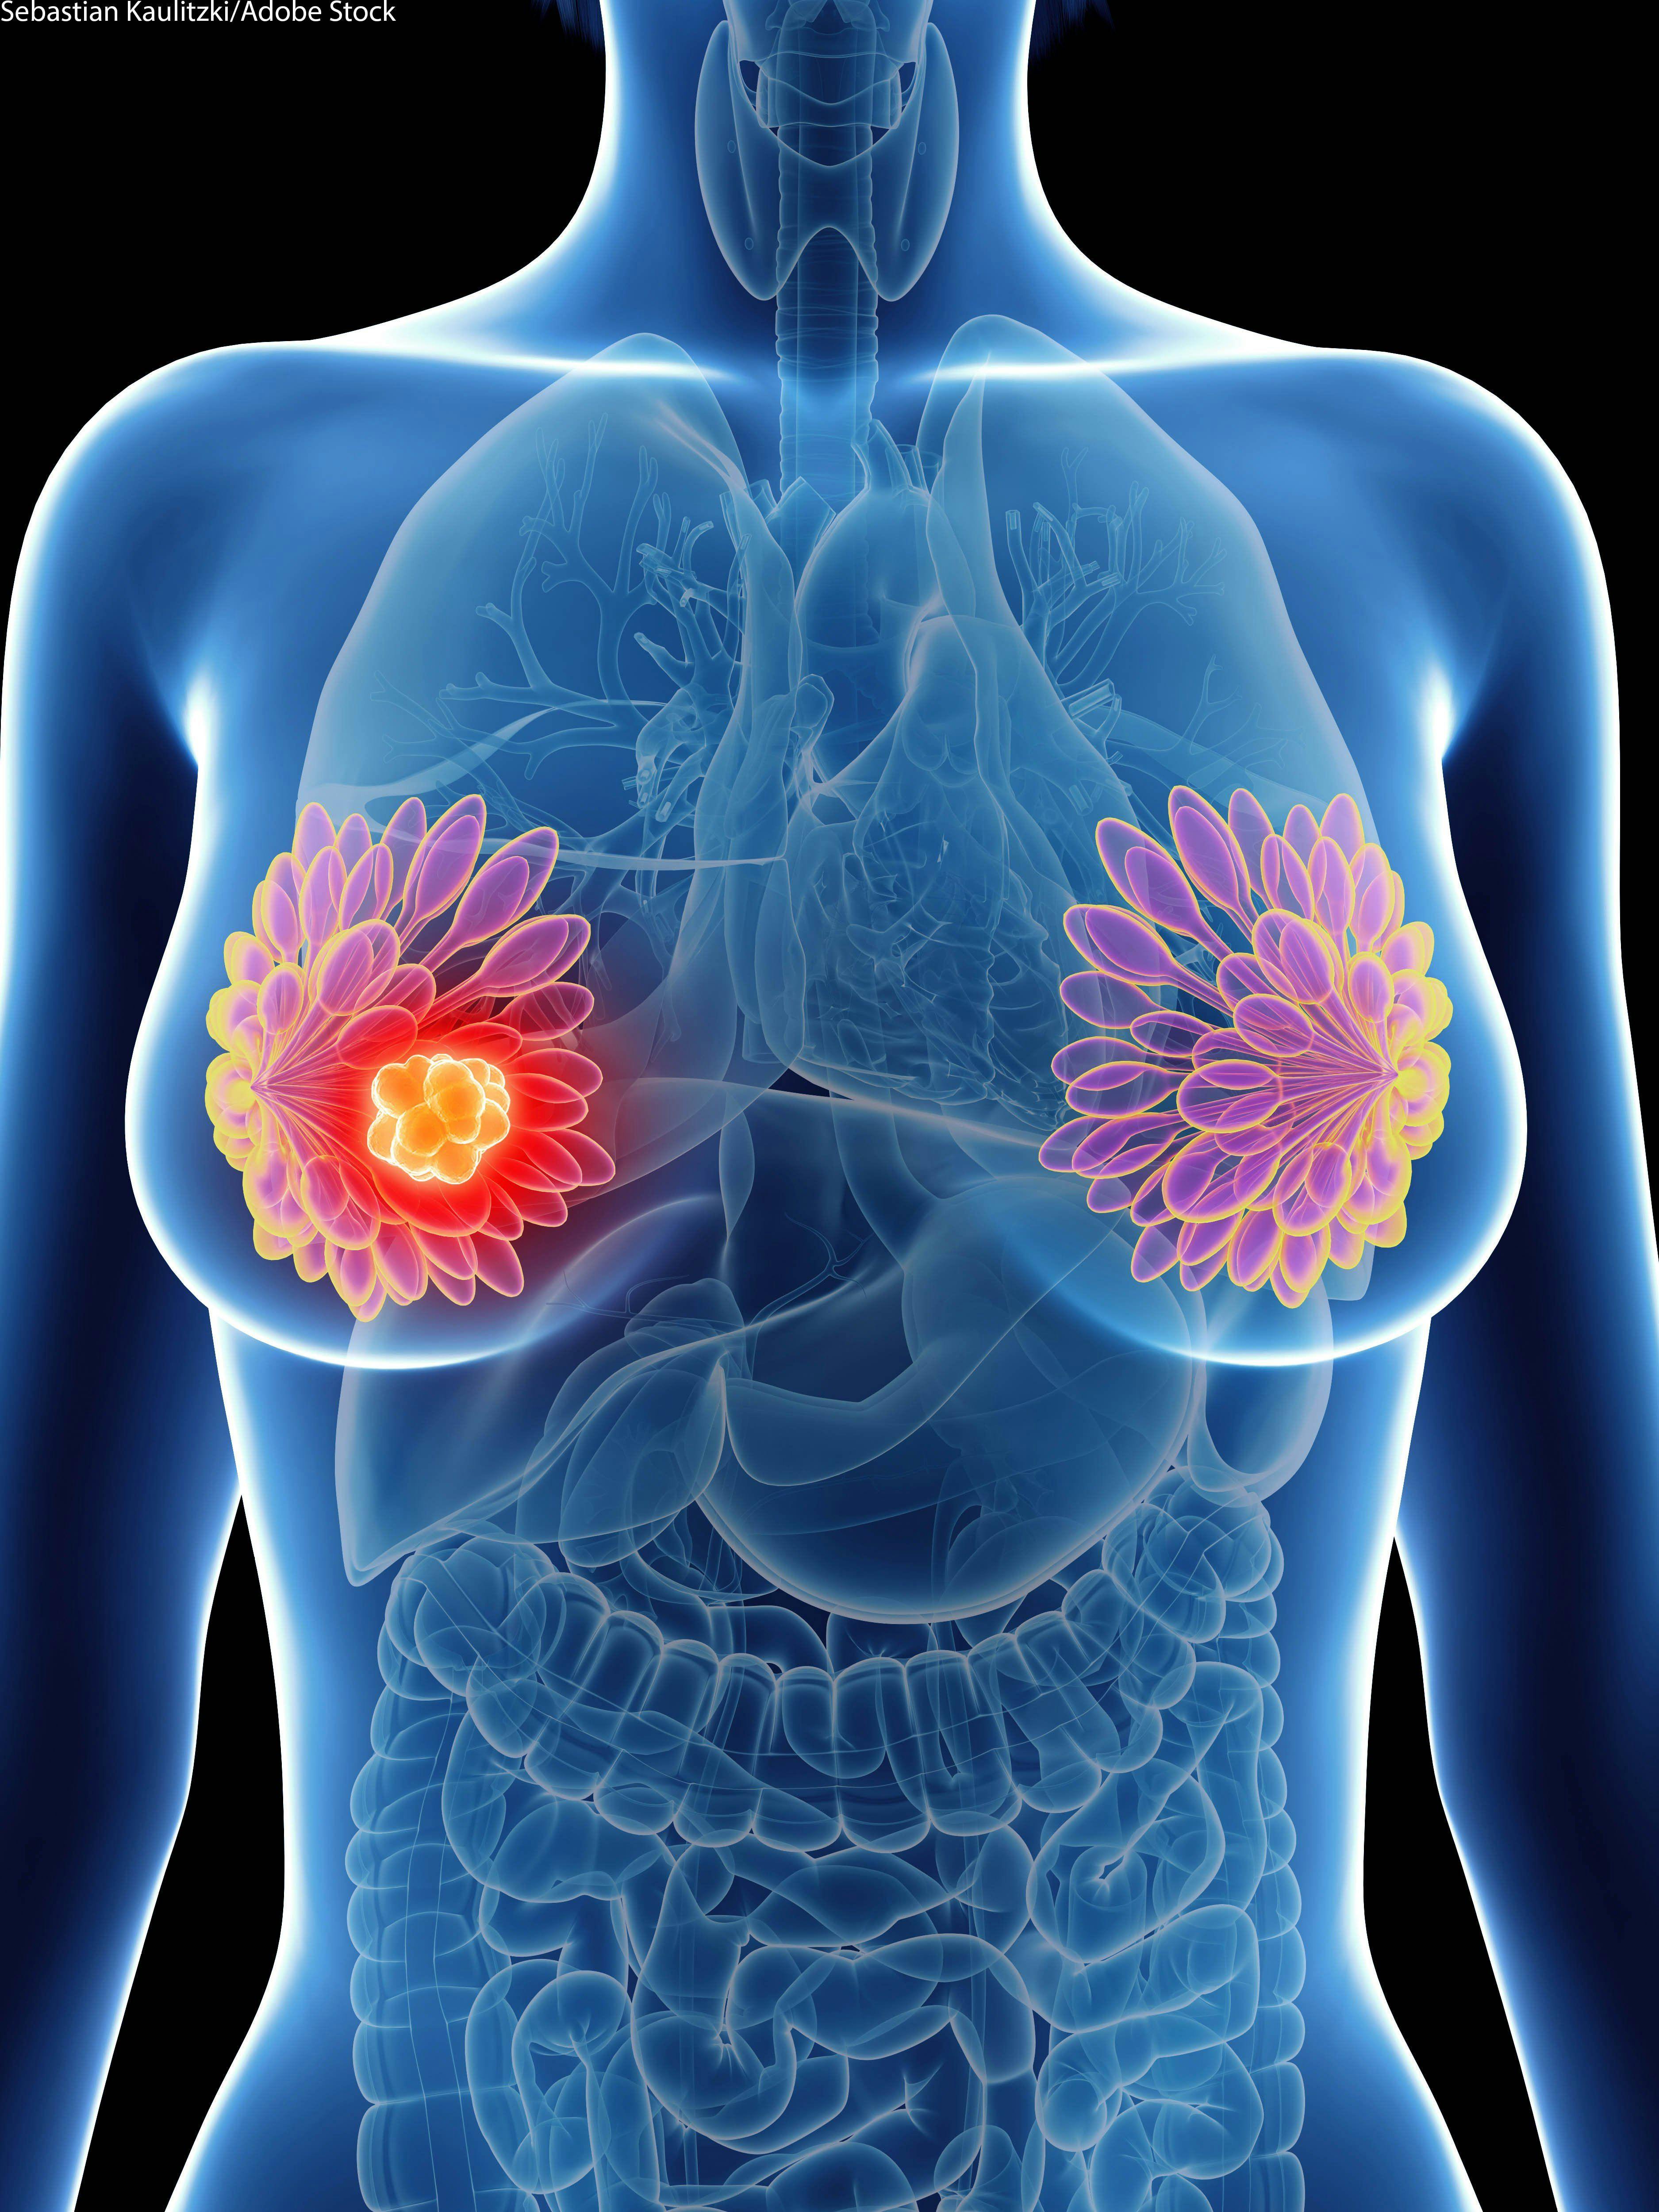 PALB2 Germline Mutations Moderately Increased Risk of PALB2-Related Breast Cancer in China